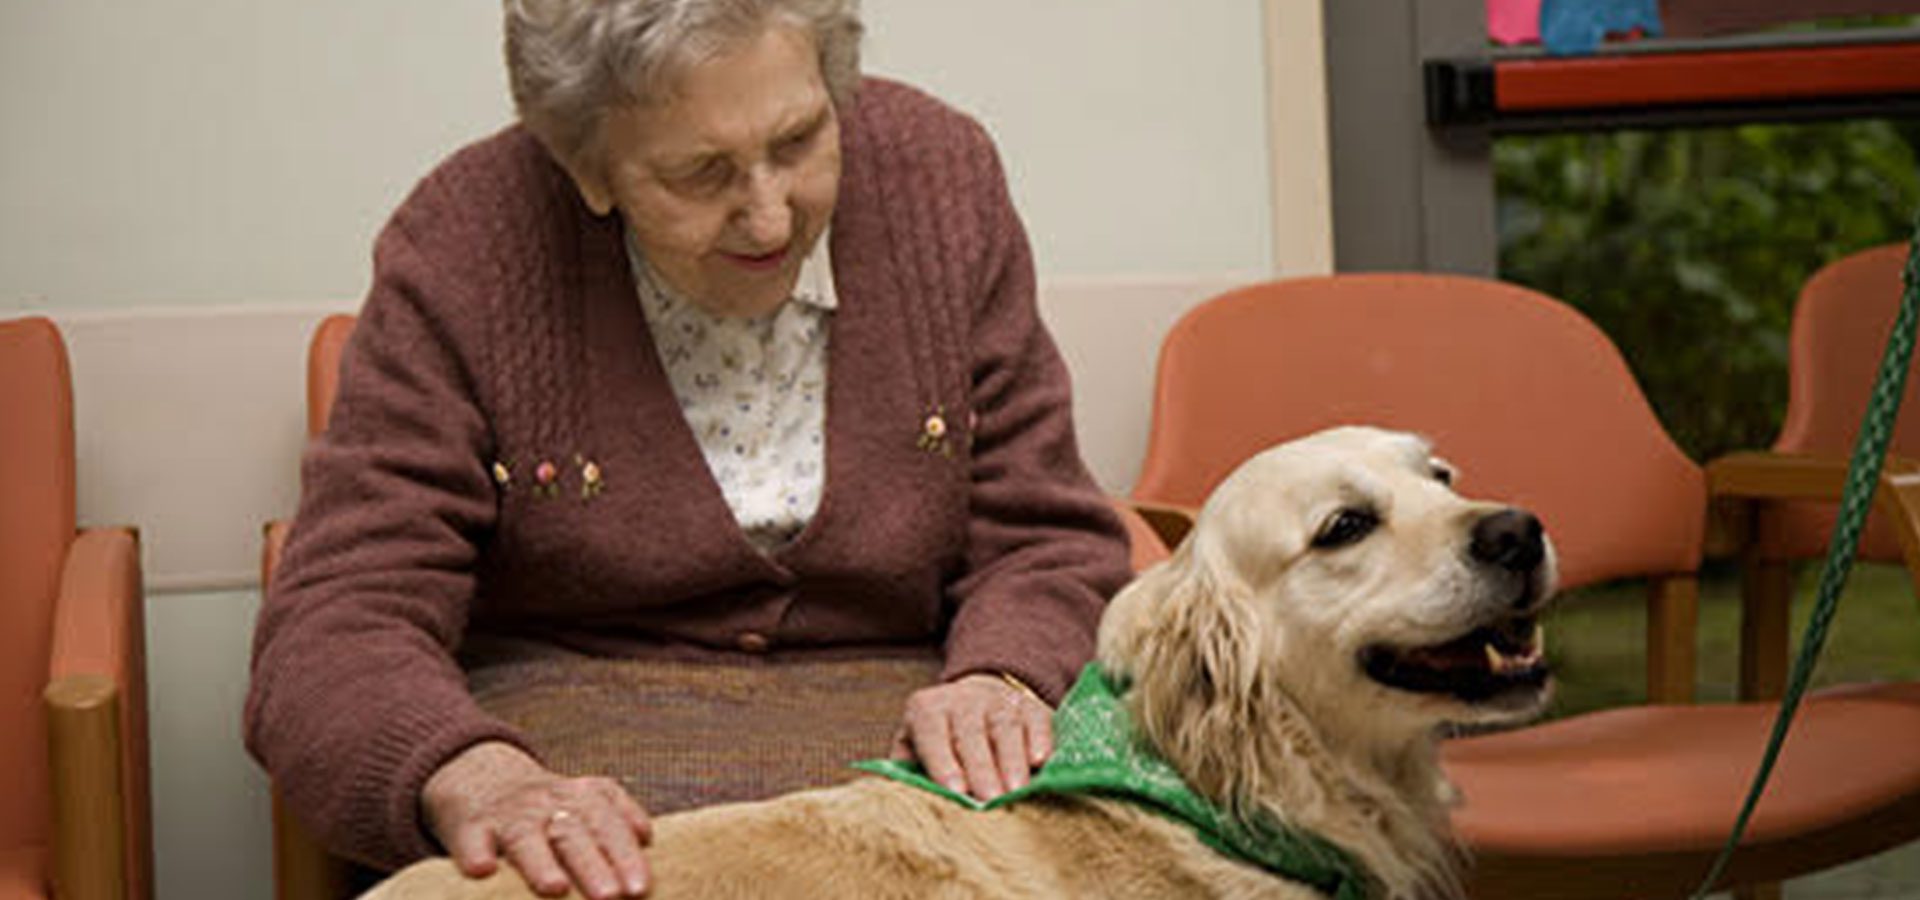 Animal-assisted interventions: the relationship at the center